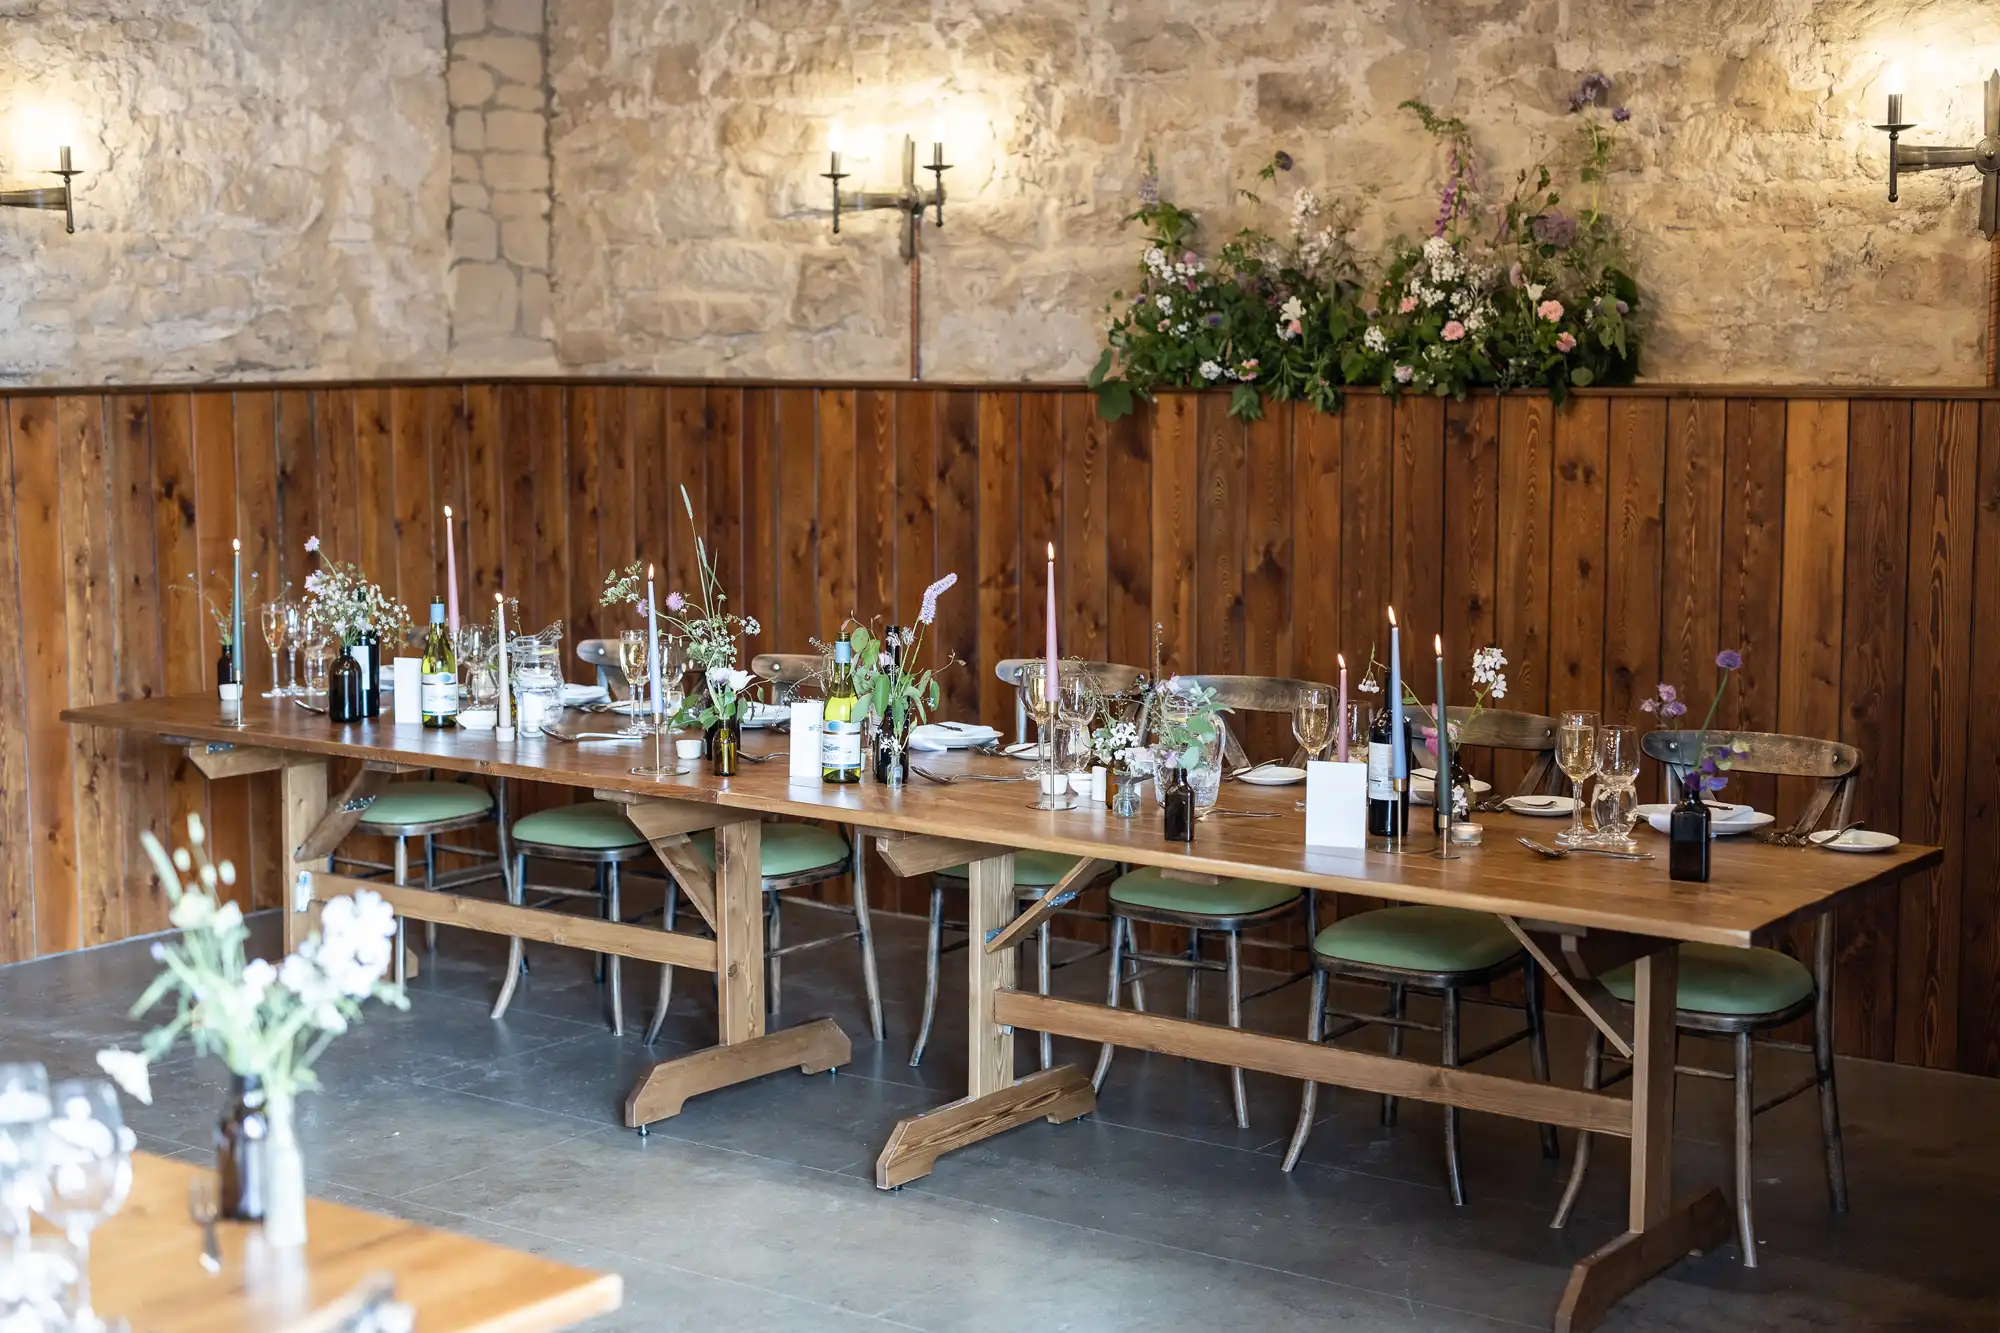 Rustic dining setup inside a stone-walled room with a long wooden table adorned with flowers, glasses, and bottles, flanked by green chairs.